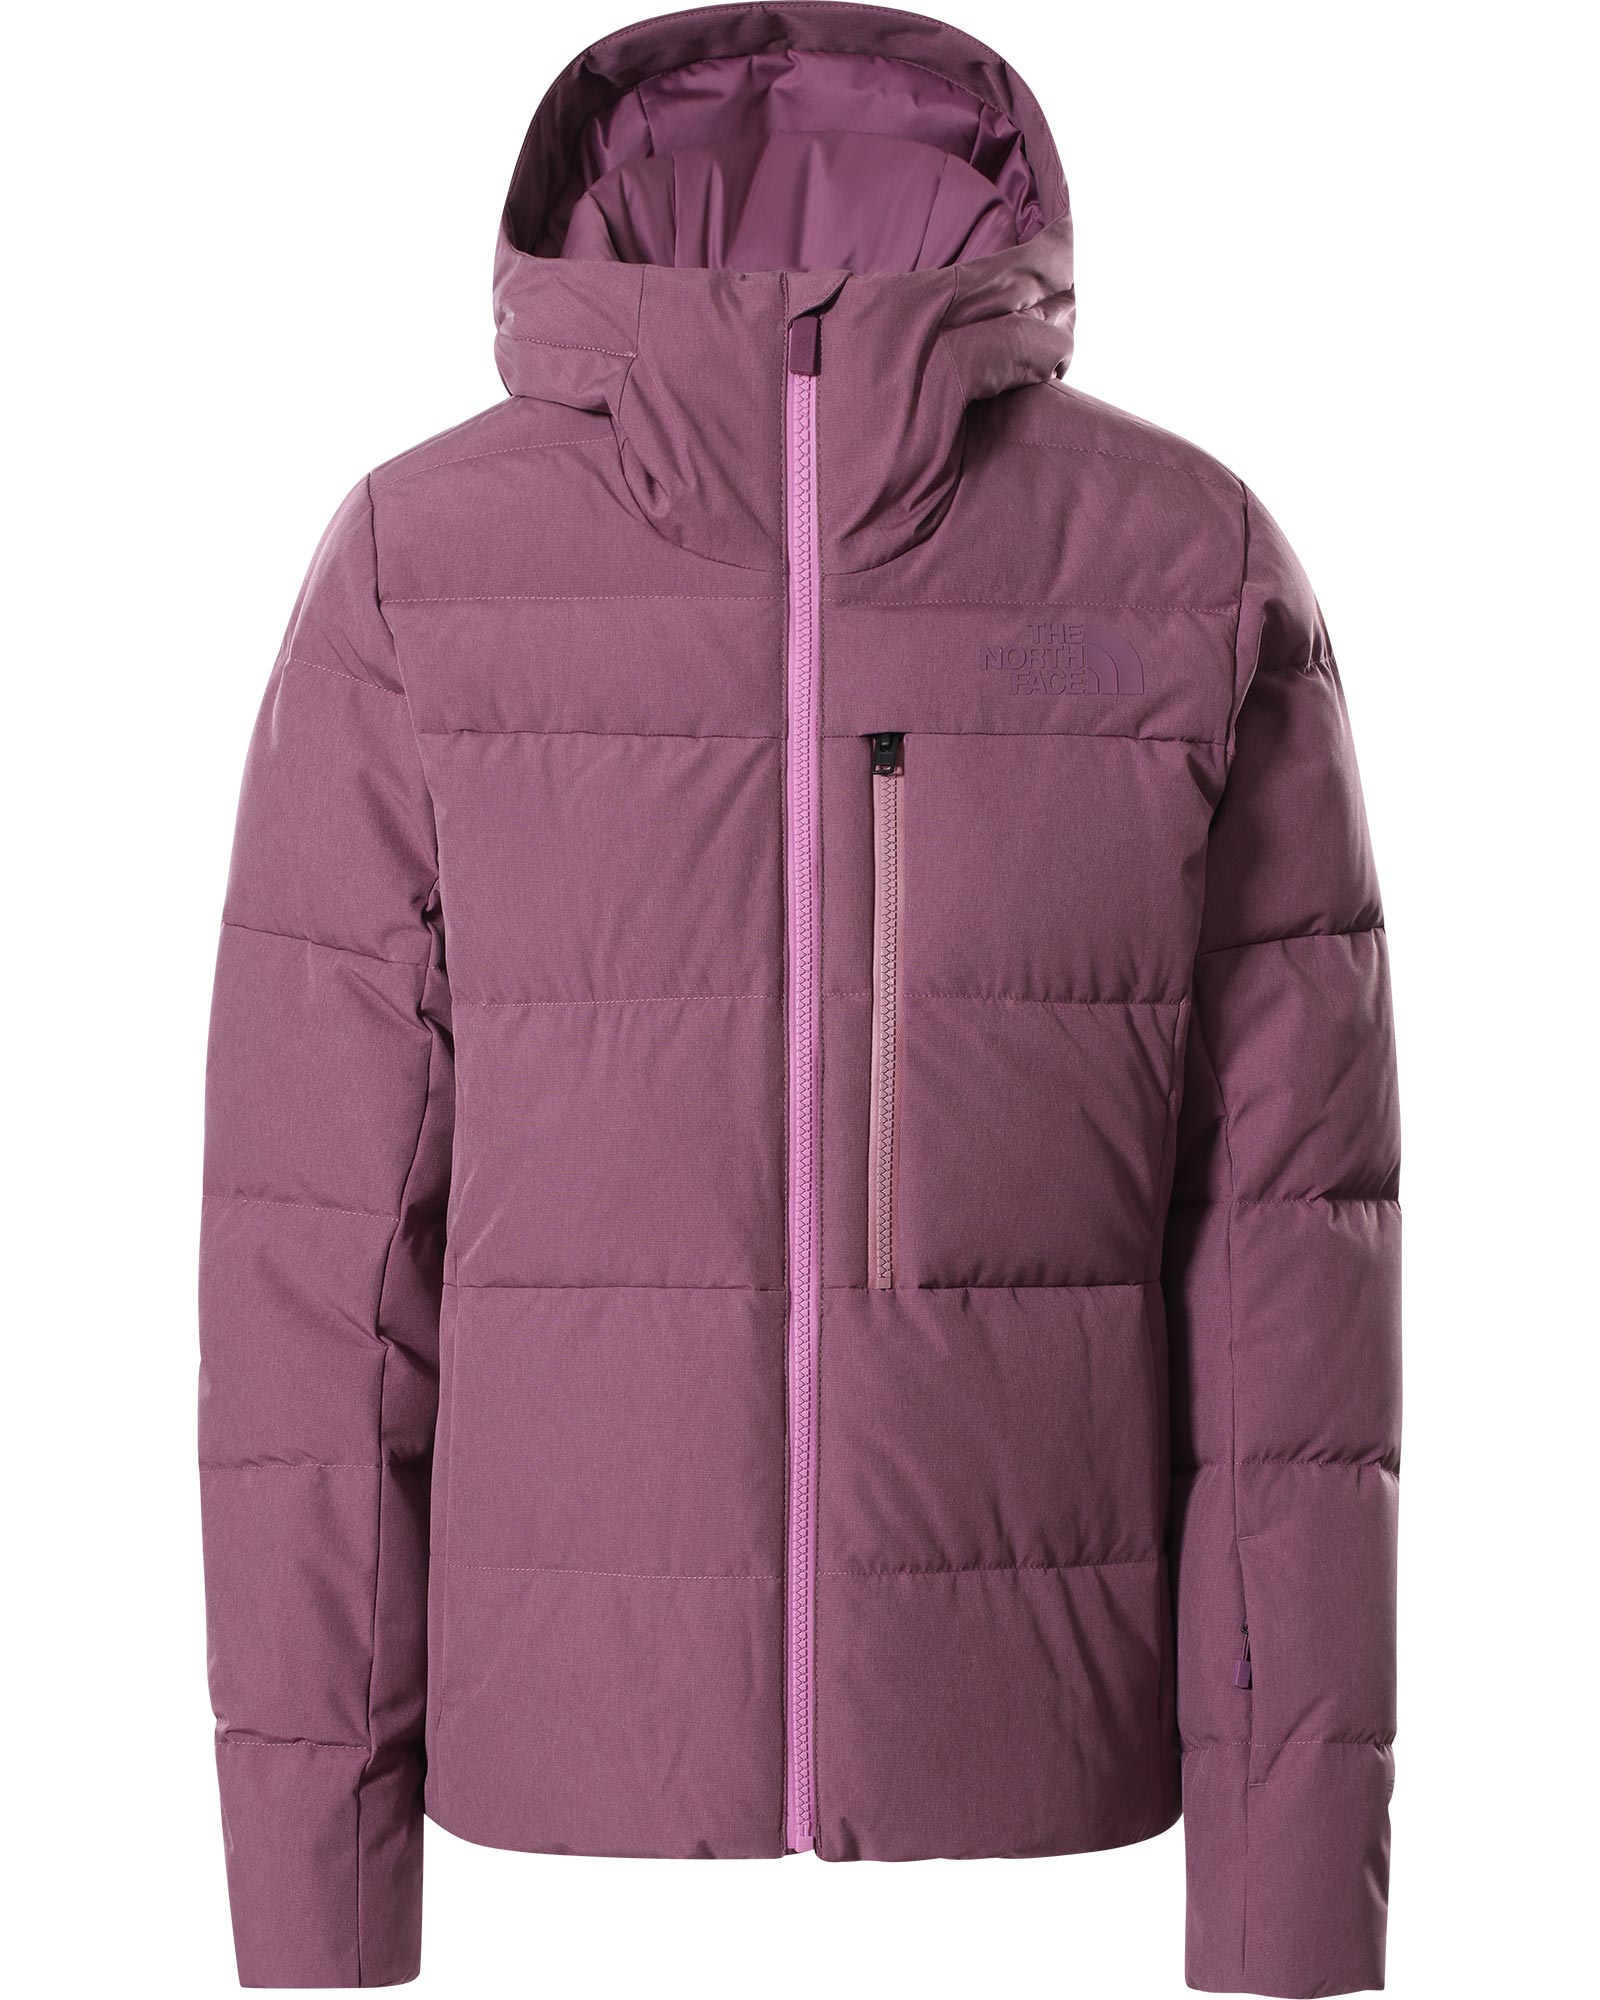 The North Face Heavenly Down Women’s Jacket - Pikes Purple Heather L